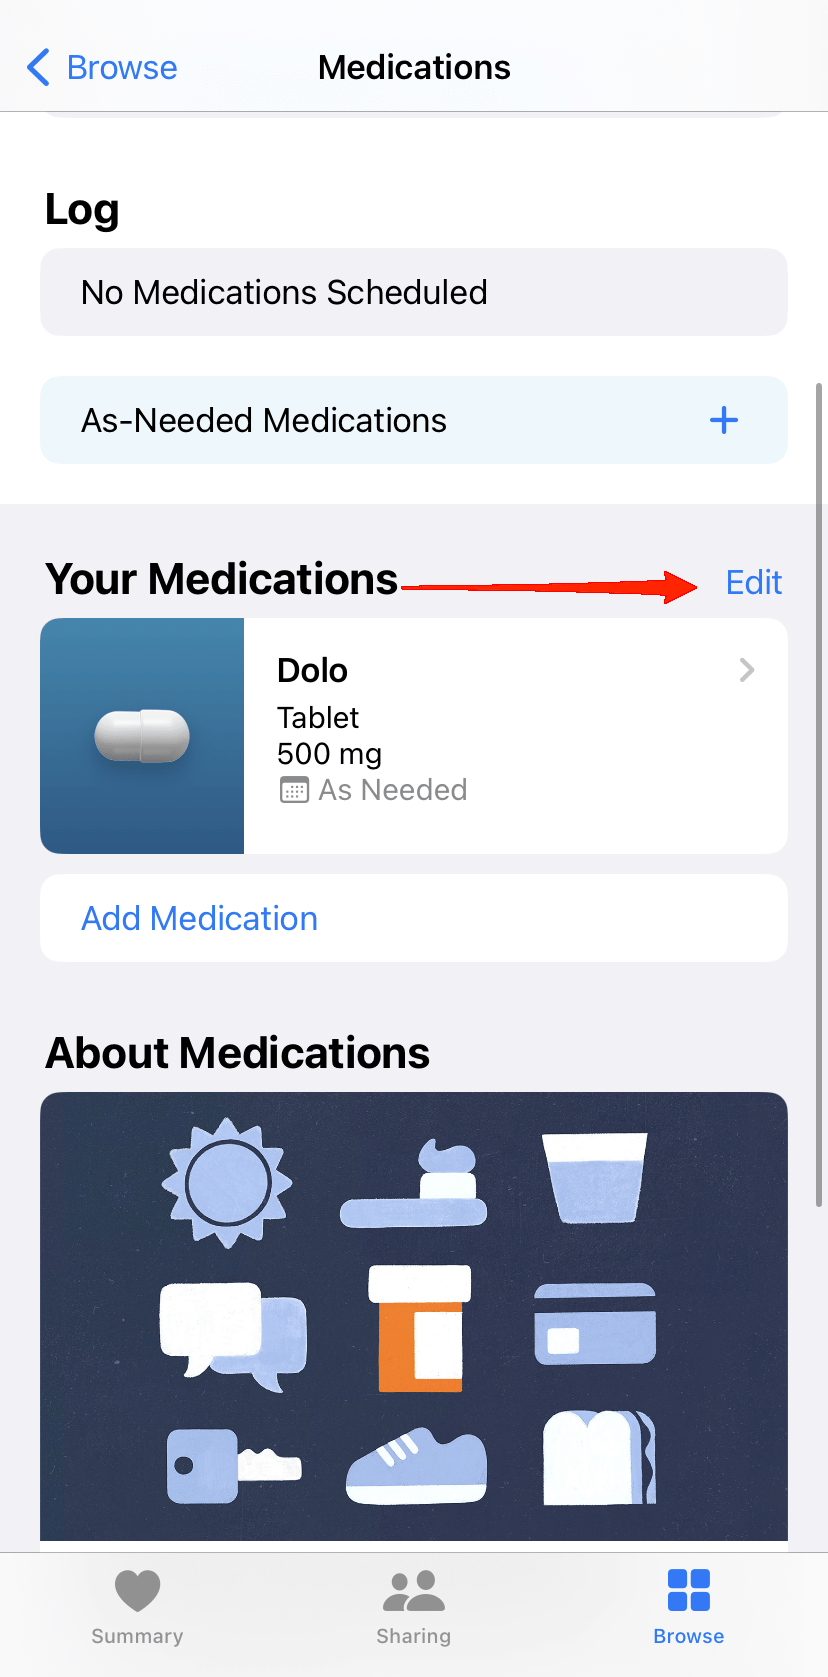 Once you open the medication list, tap on the Edit button at the top.